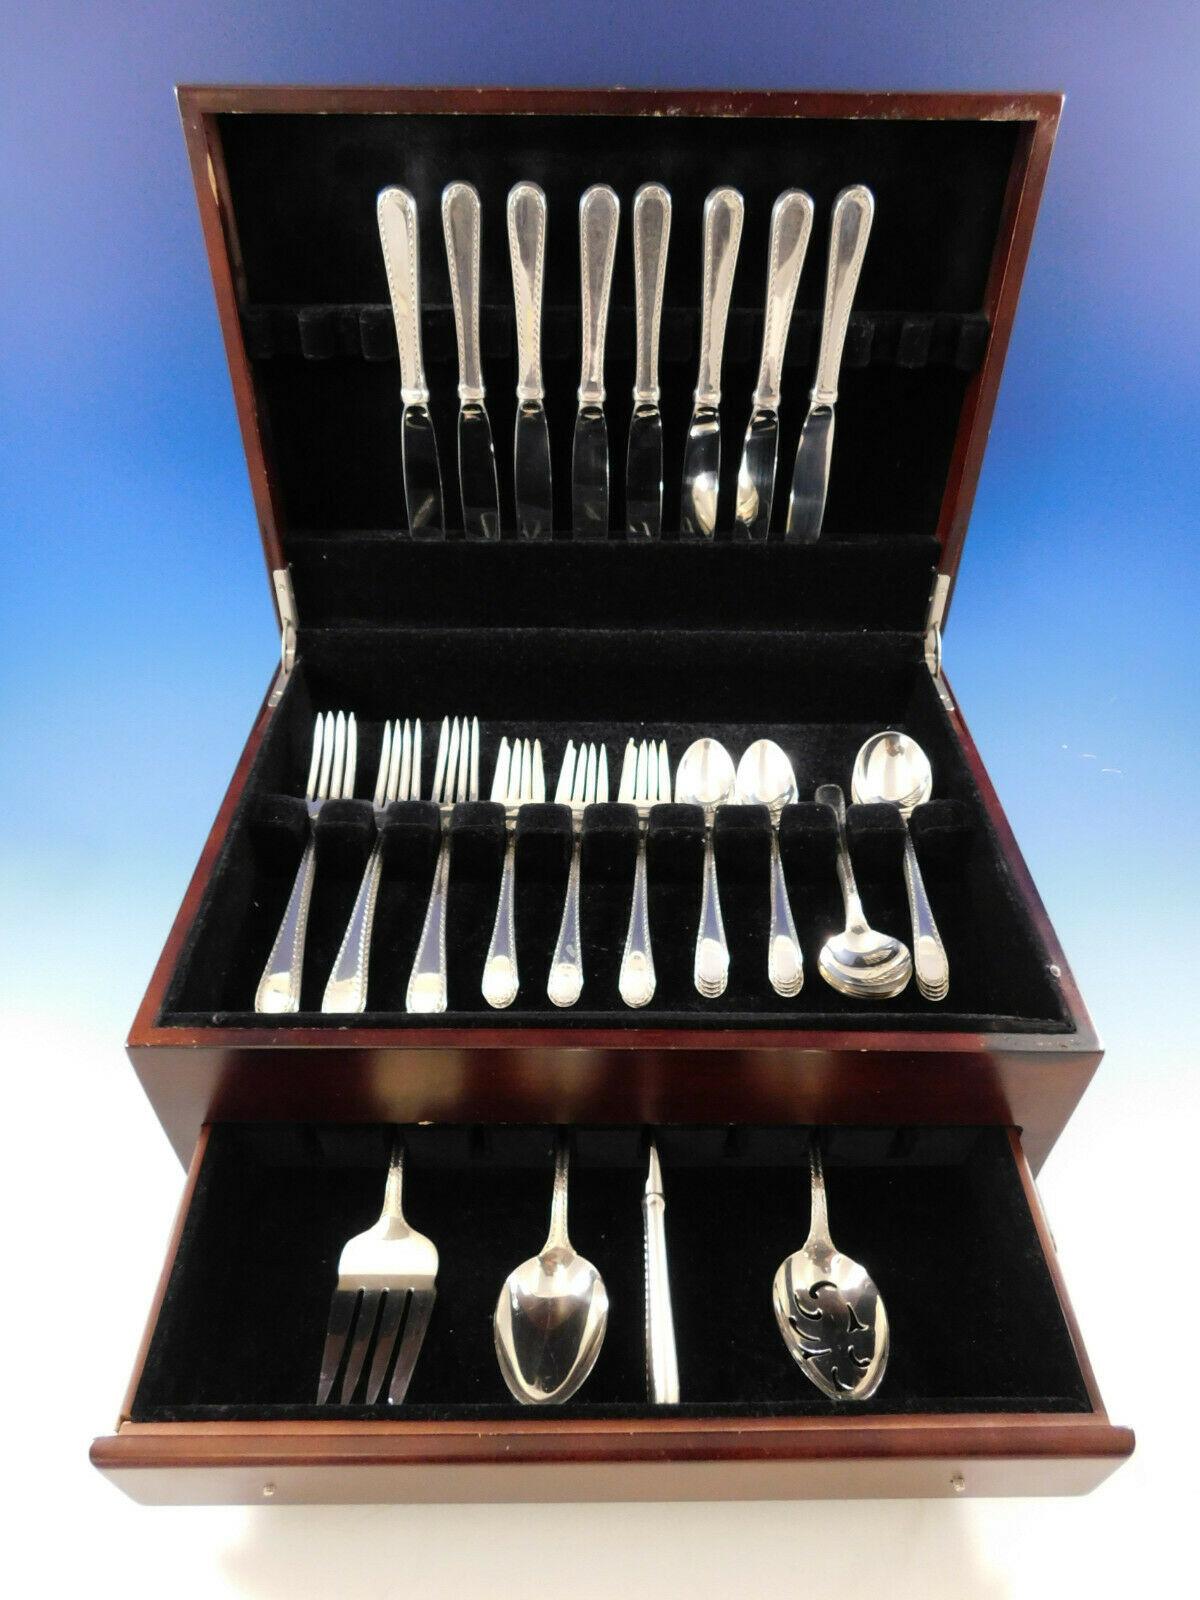 Winslow by Kirk-Stieff sterling silver flatware set, 44 pieces. This set includes:

8 knives, 9 1/4